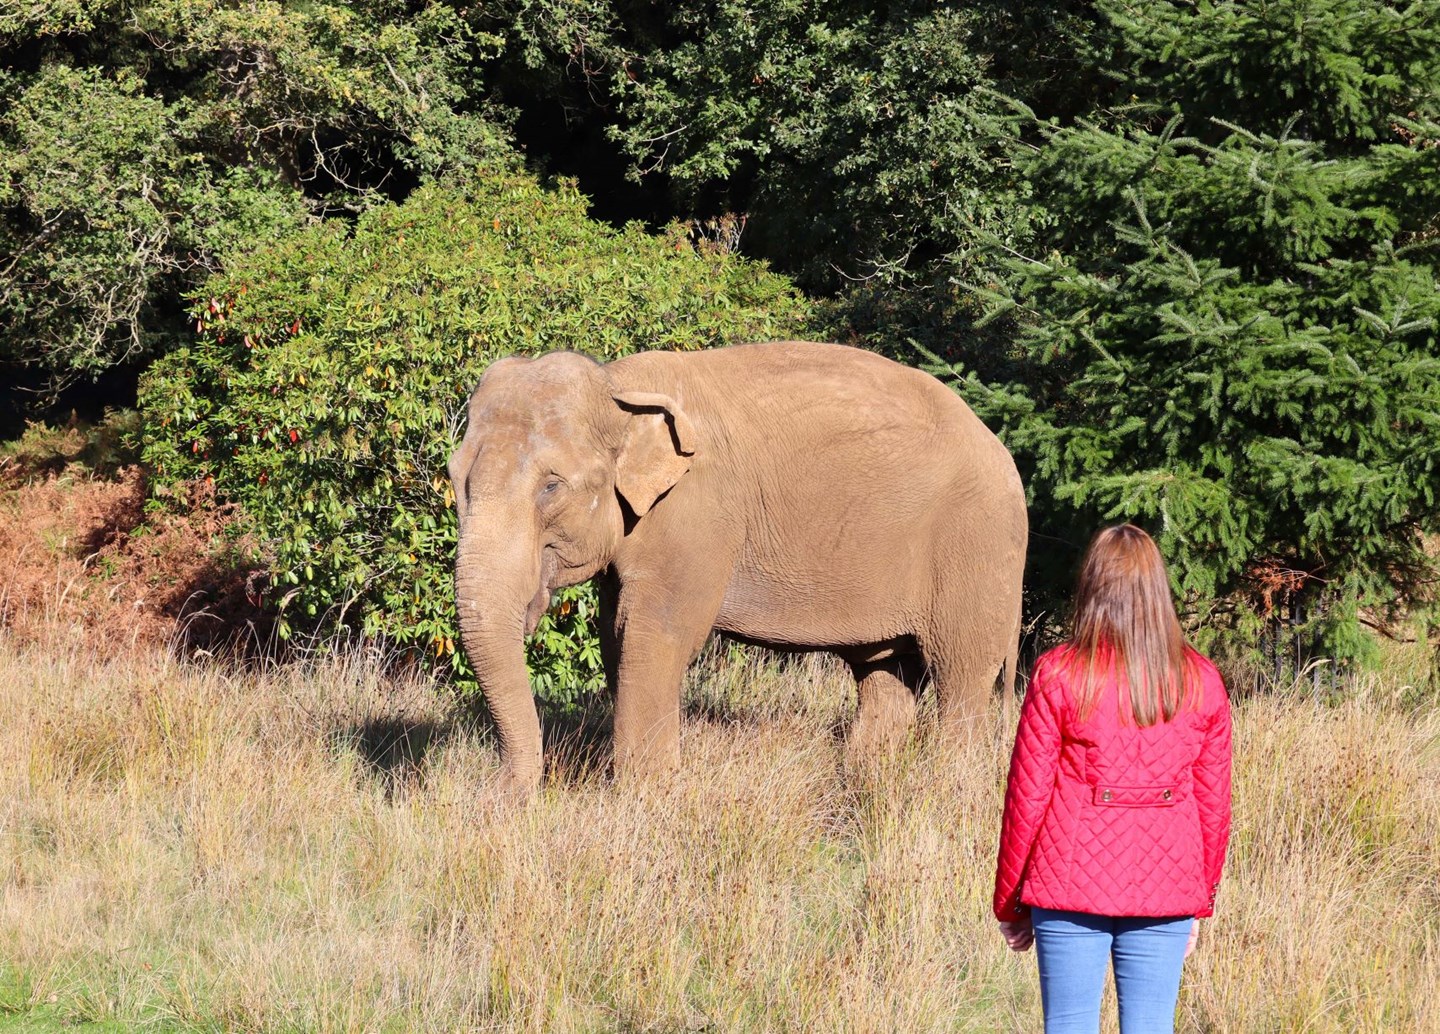 Woman looks at asian elephant in forest with no barriers between them 